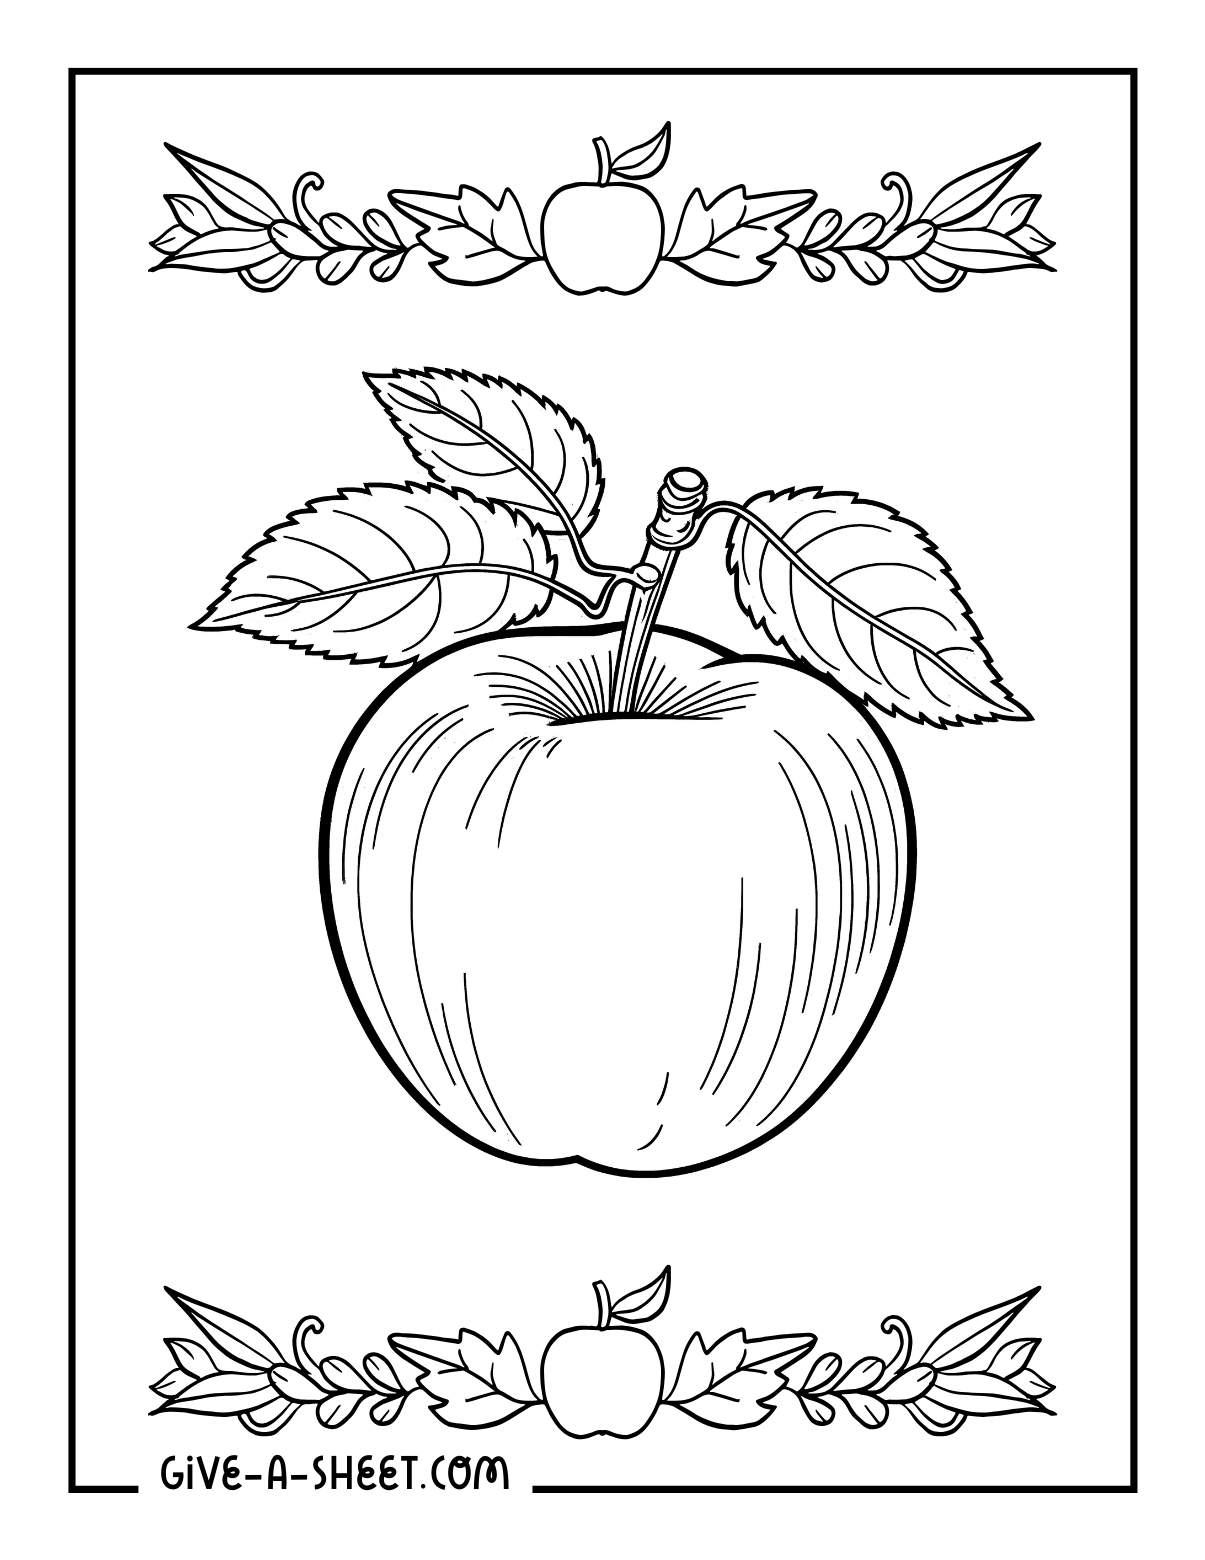 Realistic apple with intricate designs to color.